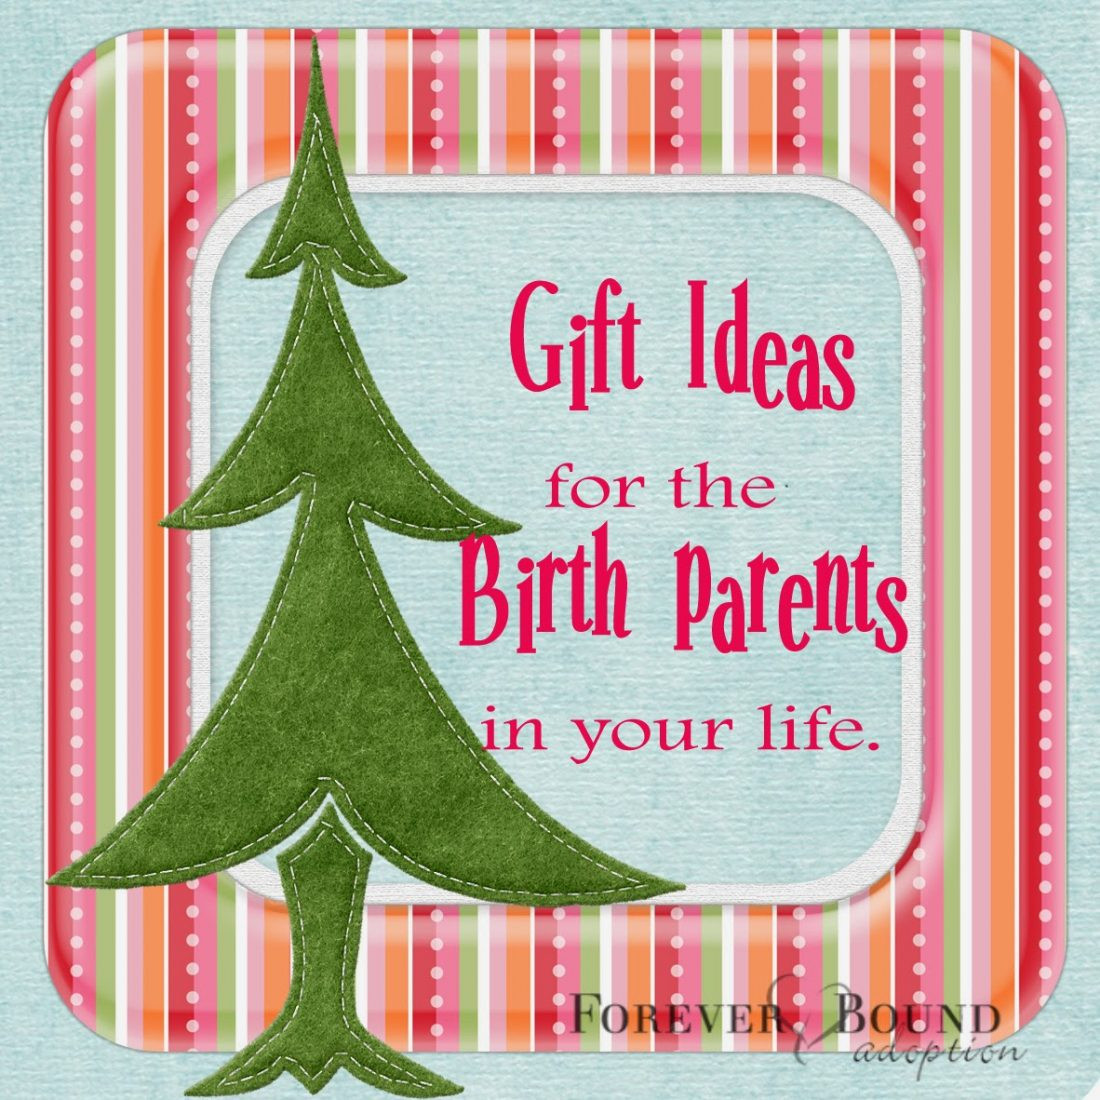 Gift Ideas For Your Parents
 Gift Ideas for the Birth Parents in Your Life Forever